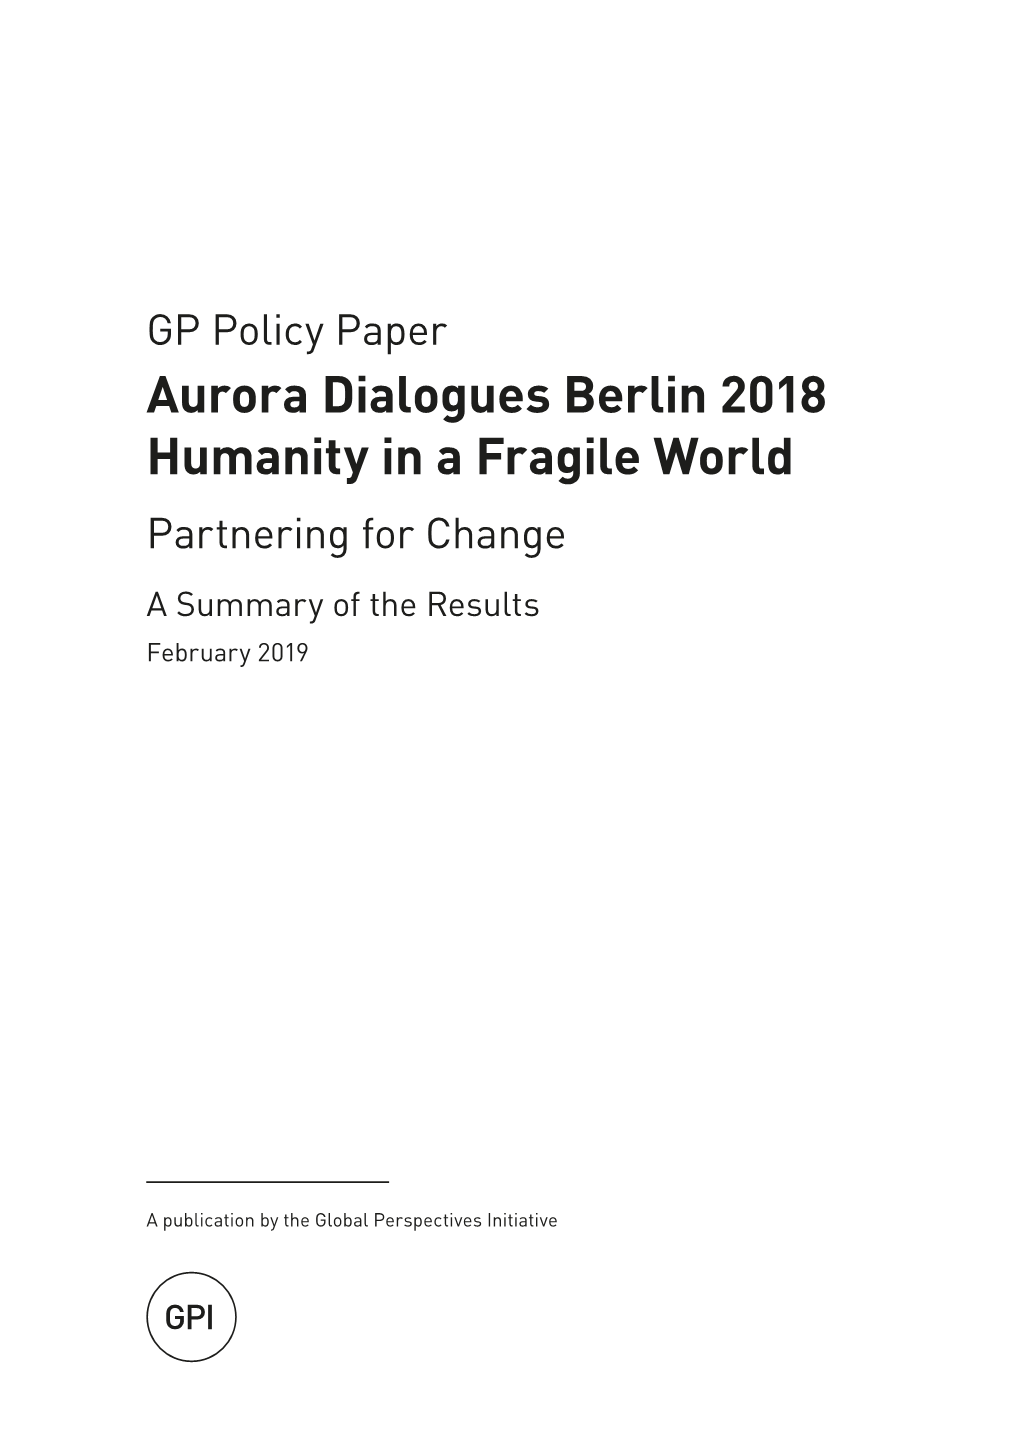 Aurora Dialogues Berlin 2018 Humanity in a Fragile World Partnering for Change a Summary of the Results February 2019